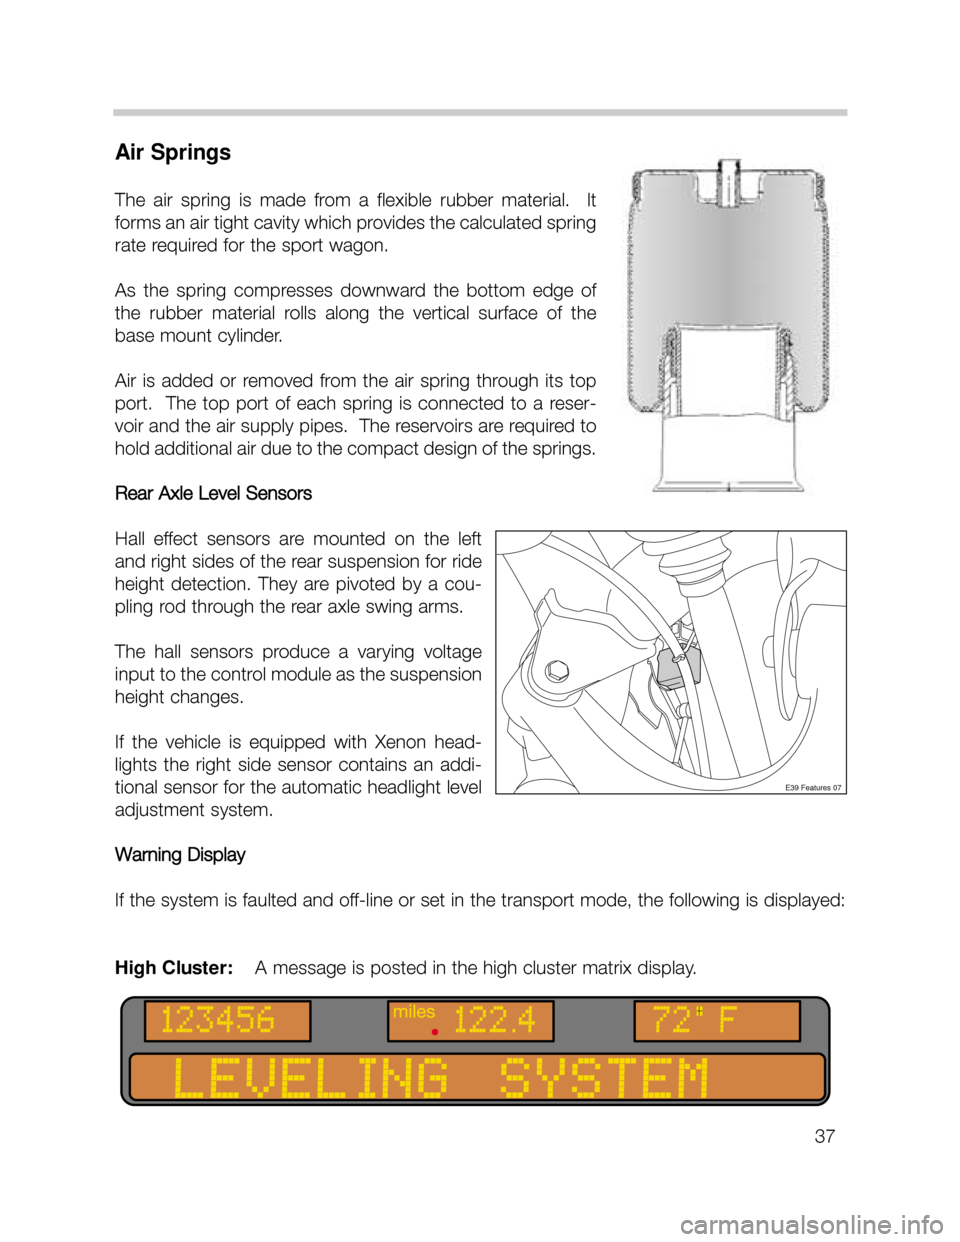 BMW X5 2001 E53 Workshop Manual Air Springs
The  air  spring  is  made  from  a  flexible  rubber  material.    It
forms an air tight cavity which provides the calculated spring
rate required for the sport wagon.
As  the  spring  co